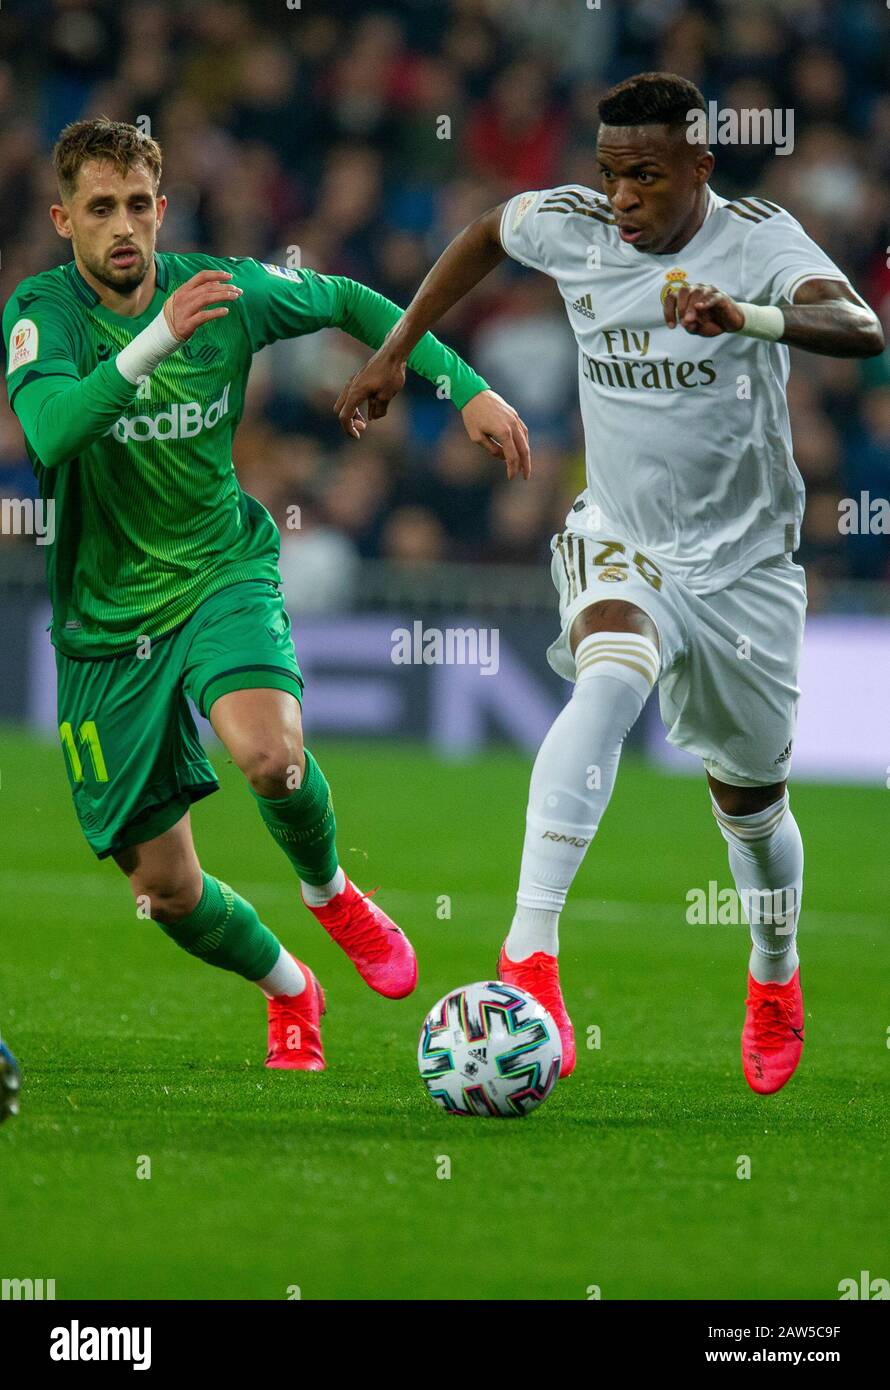 Real Madrid CF's Vinicius Jr and Real Sociedad's Adnan Januzaj are seen in action during the Spanish quarterfinal Copa del Rey match between Real Madrid and Real Sociedad at Santiago Bernabeu Stadium in Madrid.(Final score; Real Madrid 3:4 Real Sociedad) Stock Photo